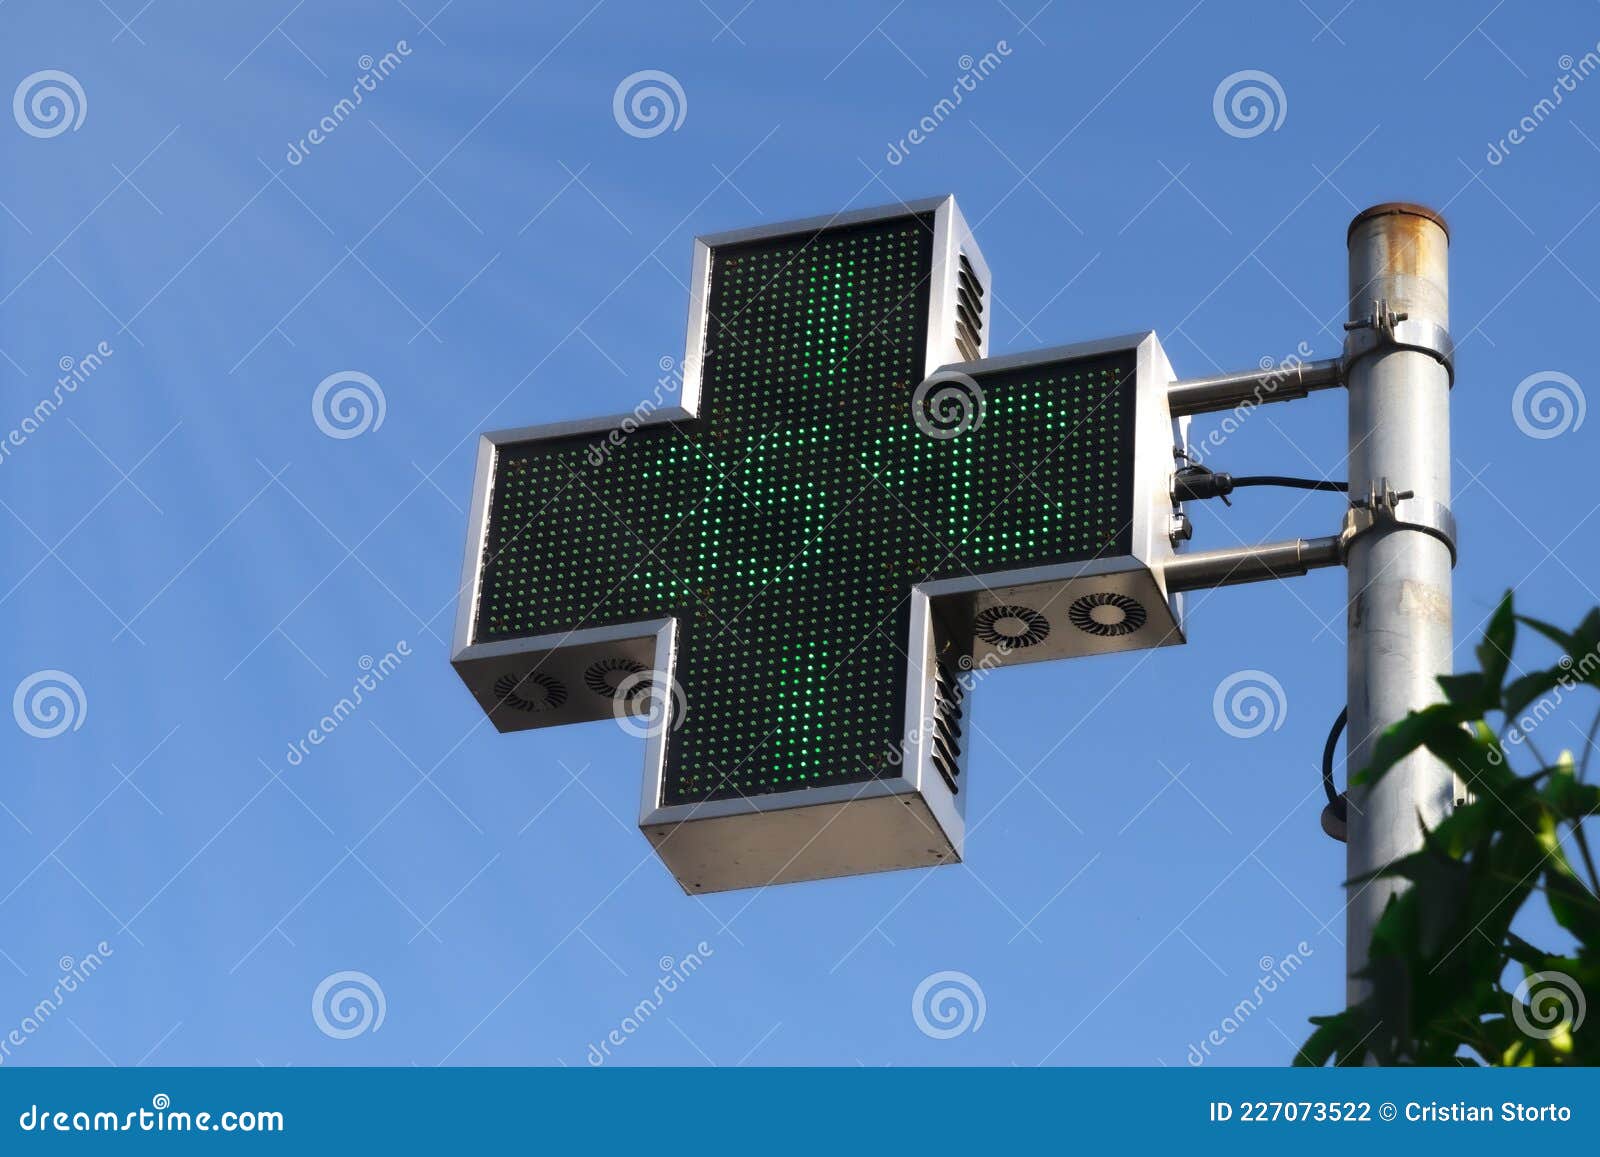 Pharmacy LED Panel Shows a Temperature of 35 Degrees Celsius during a  Summer Heat Wave Stock Photo - Image of pharmacist, green: 227073522